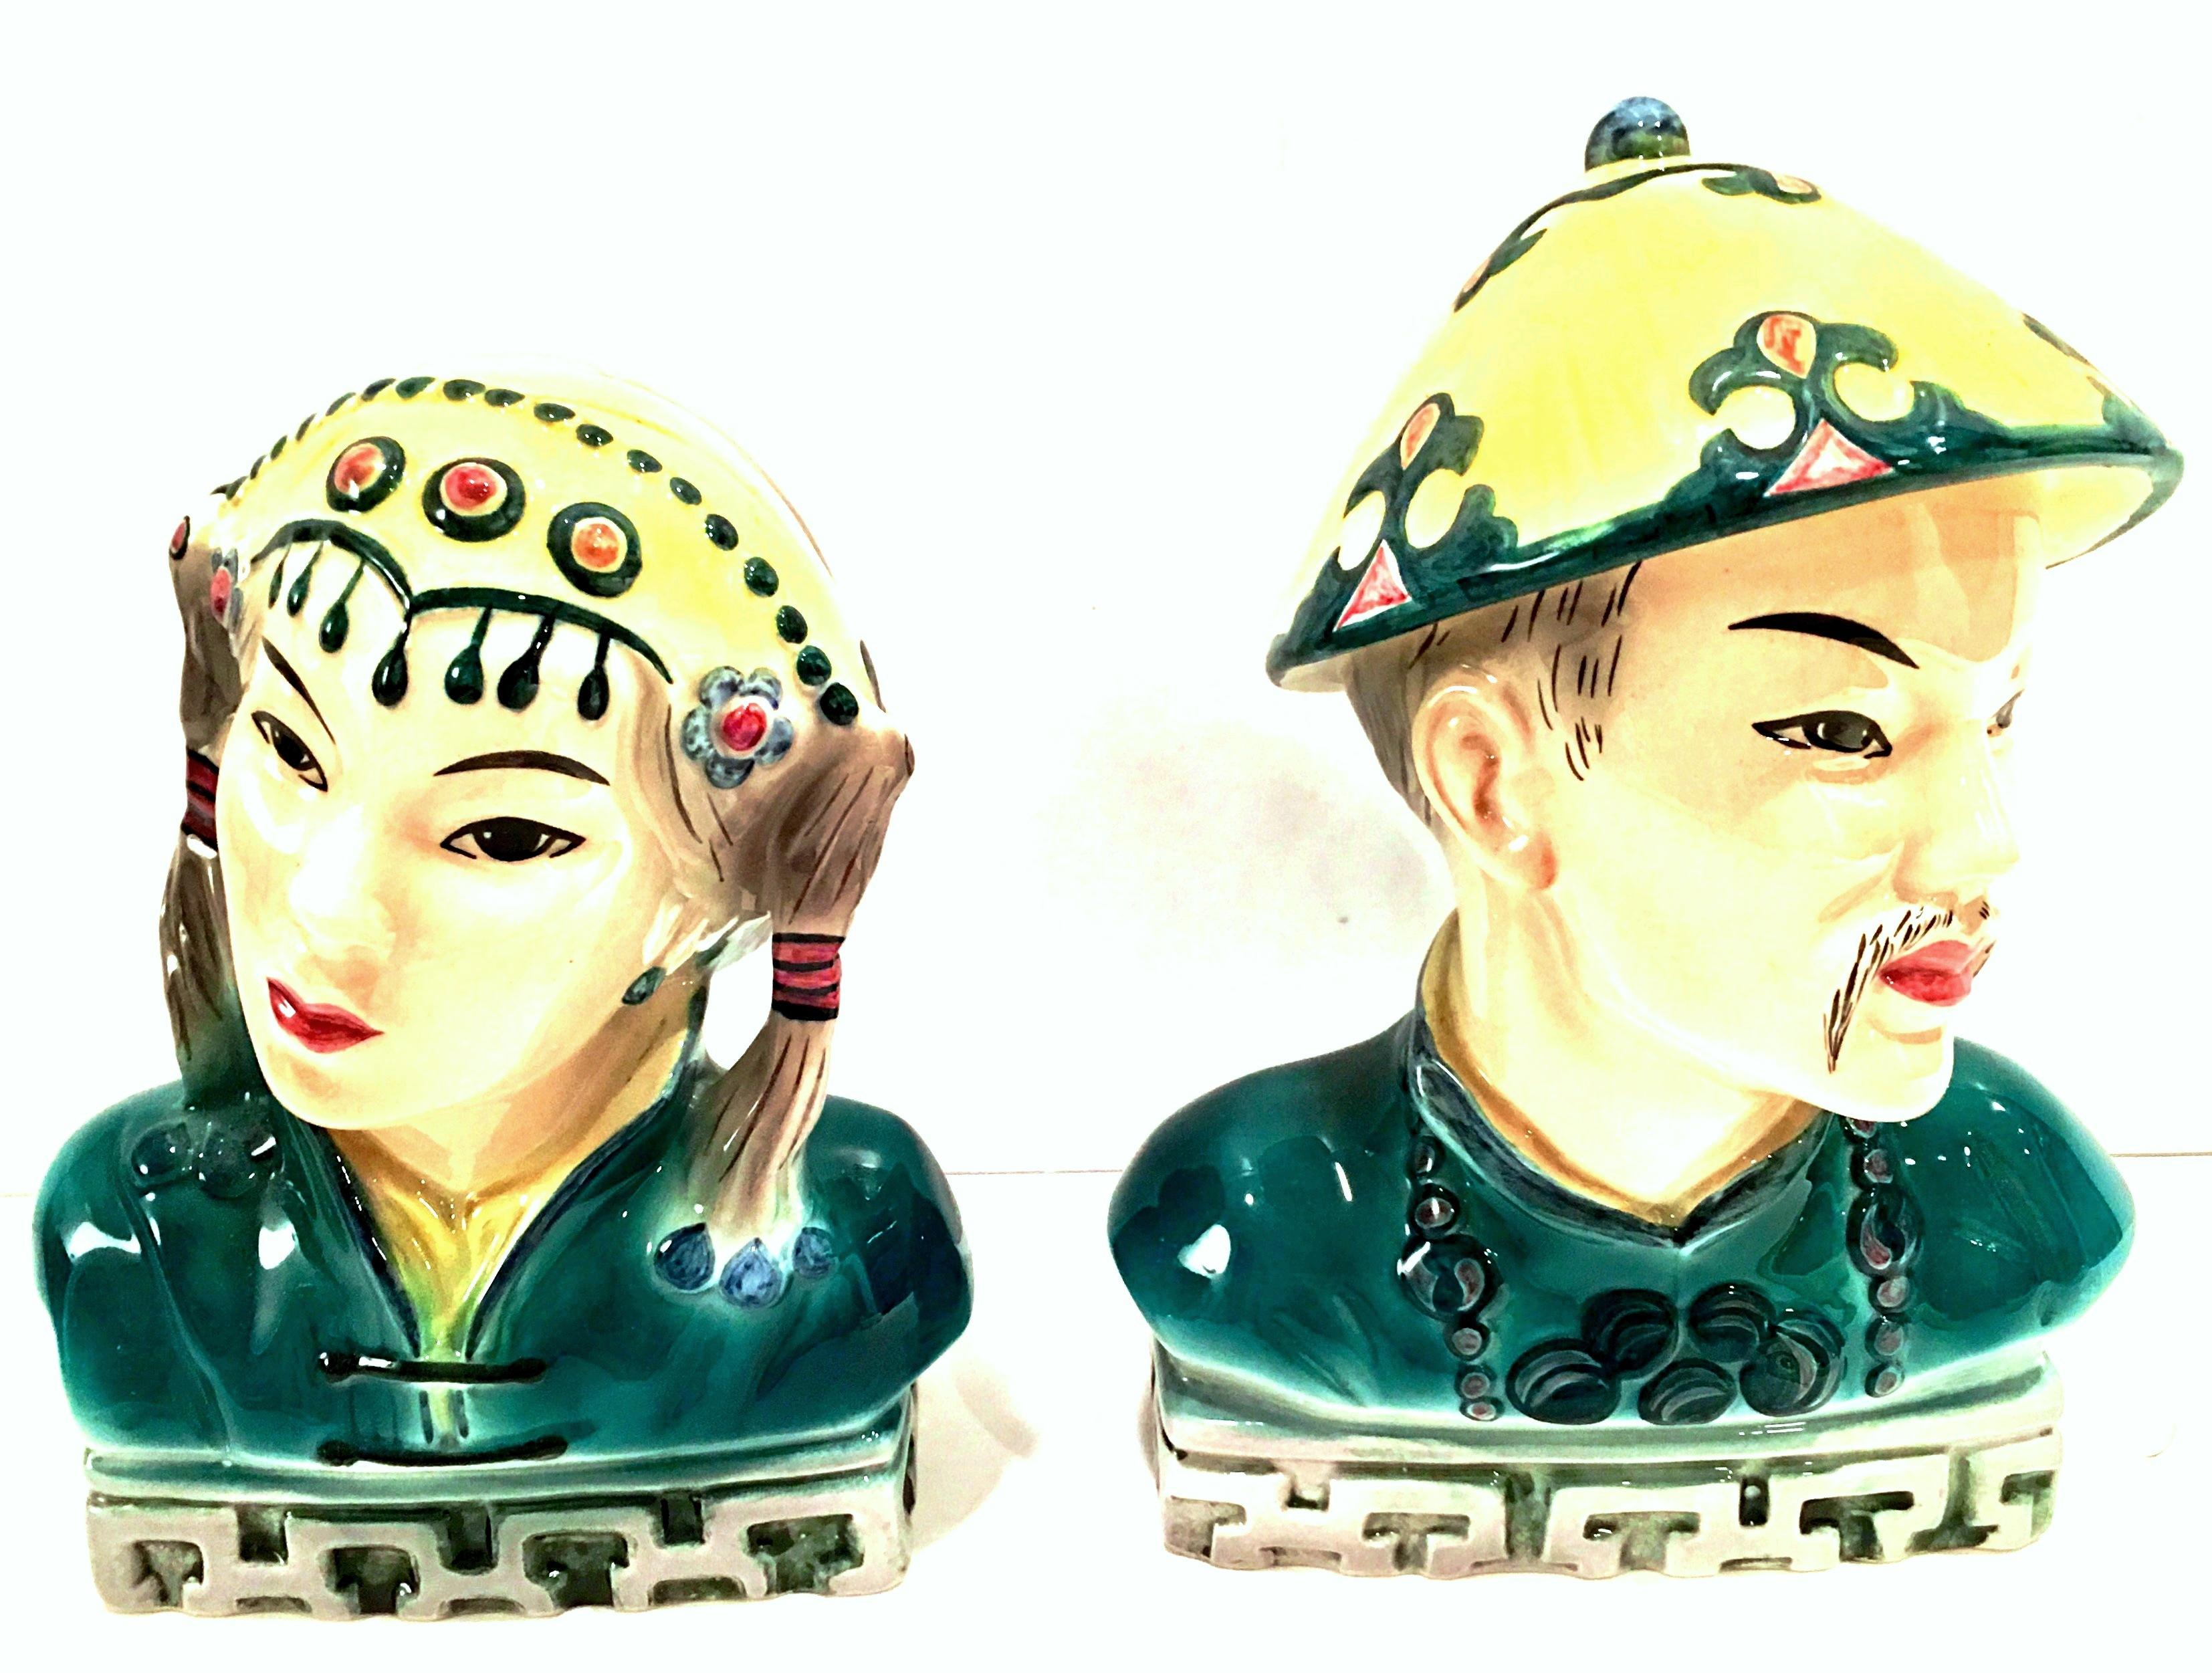 Mid-20th century pair of Japanese hand painted porcelain Asian couple sculptures by Goldscheider-Japan. Finely executed in great detail with a high gloss hand painted teal, yellow, grey, white, black and red details. Features a Greek key motif at